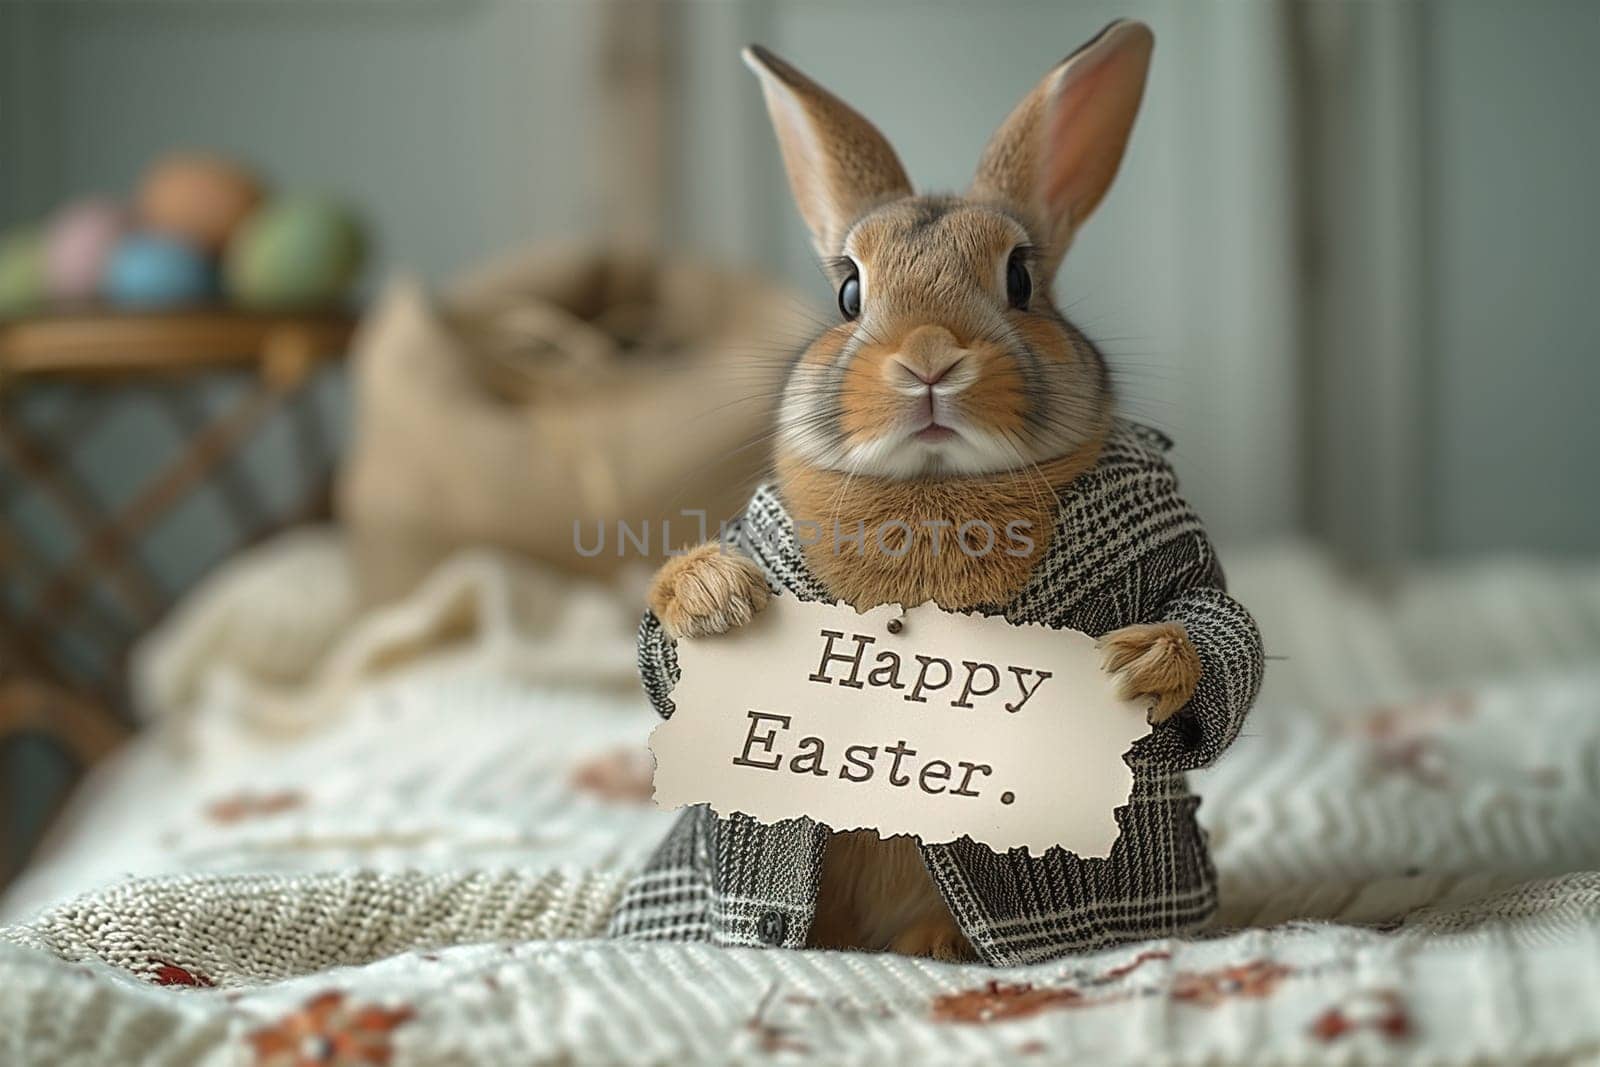 A rabbit standing upright and holding a sign that reads Happy Easter against a plain background.